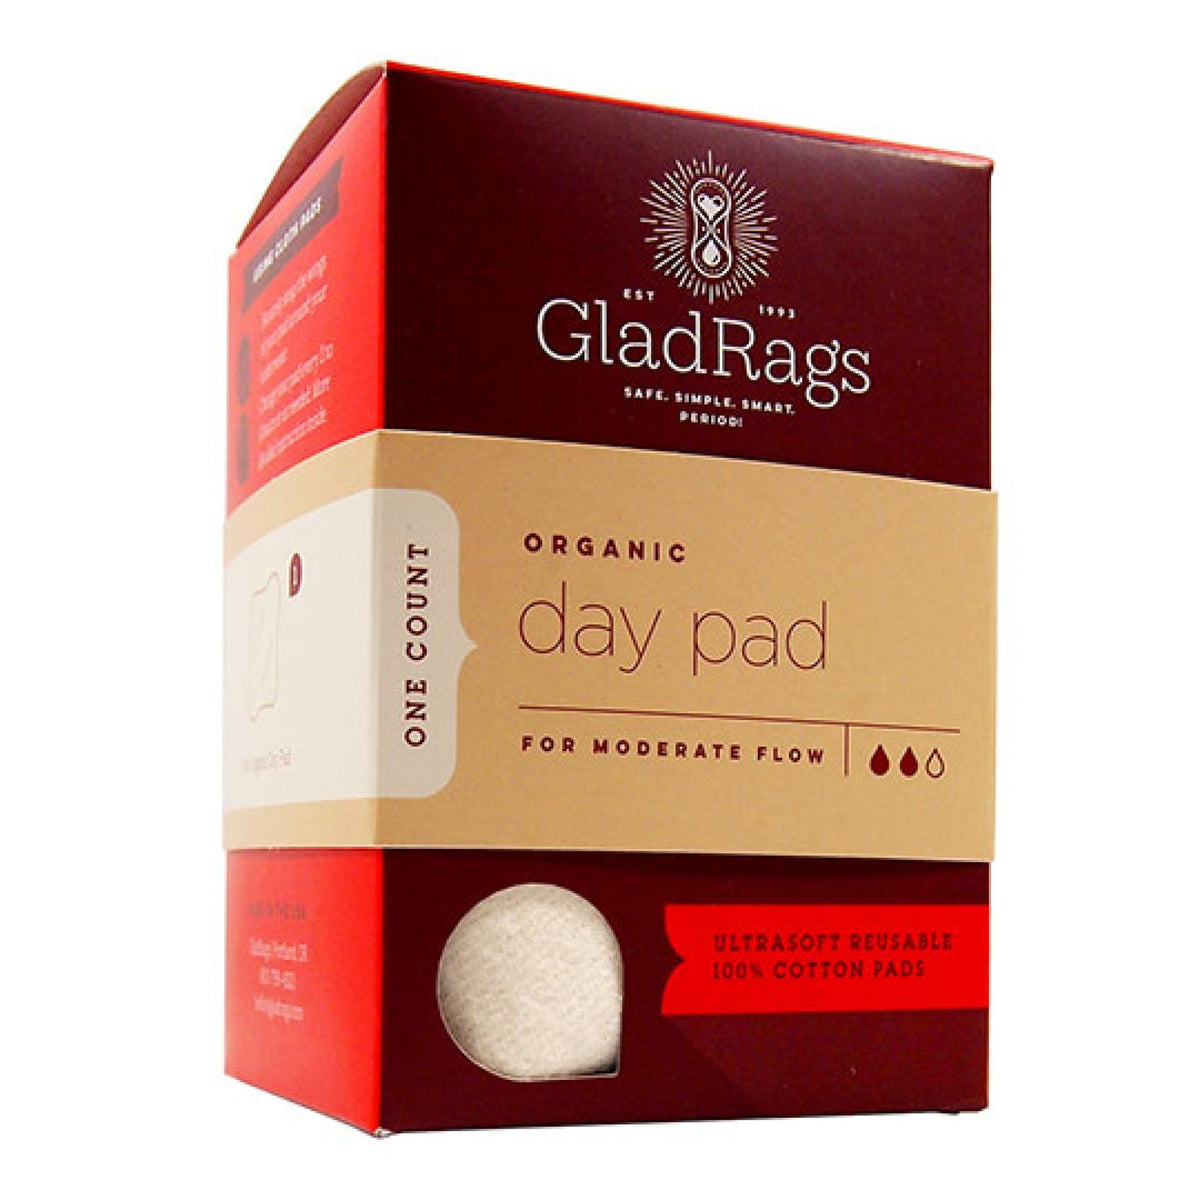 Glad Rags Organic Day Pads 1 Pack